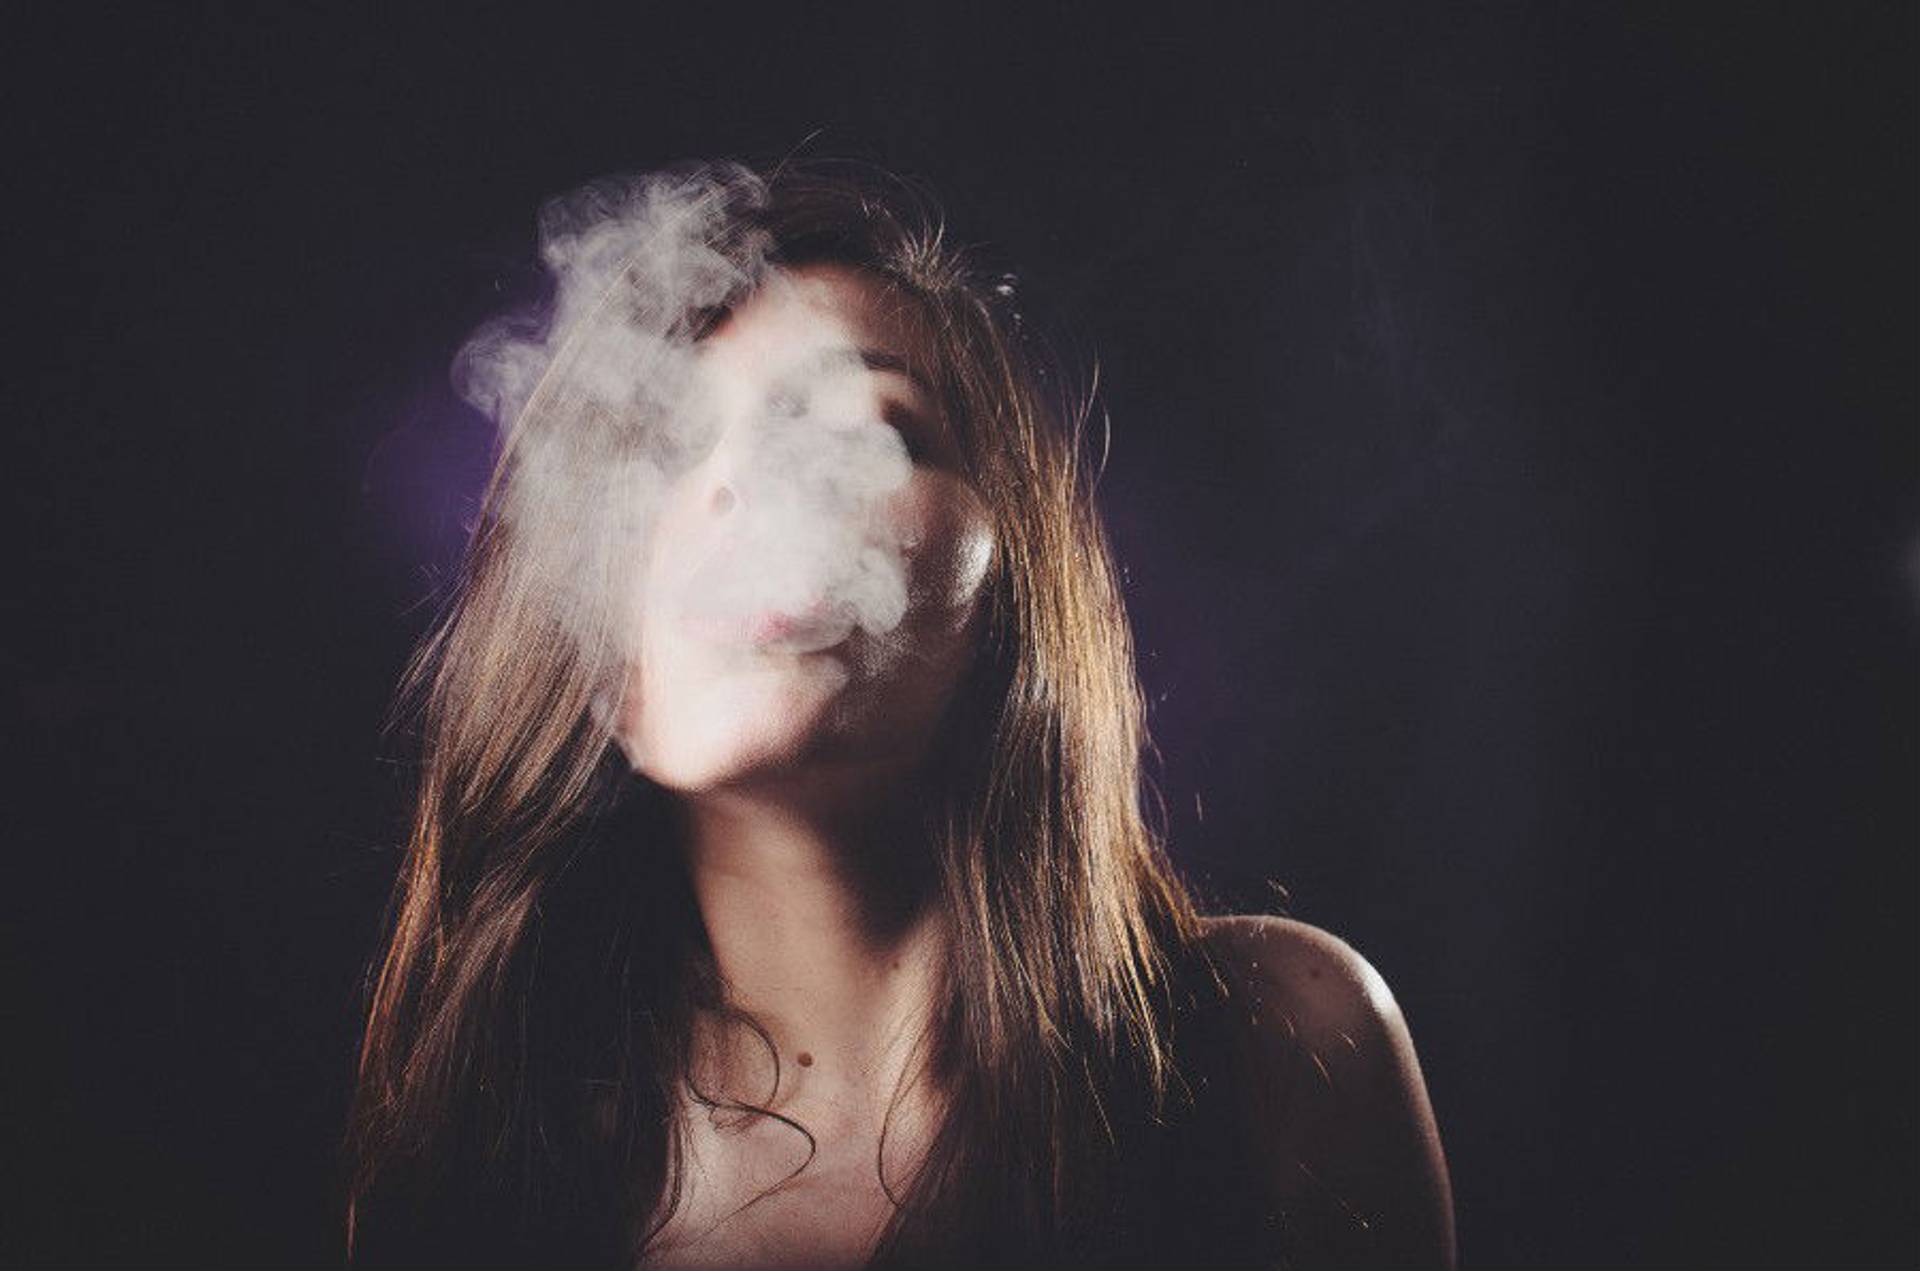 ‘Vape’ is Word Of The Year 2014